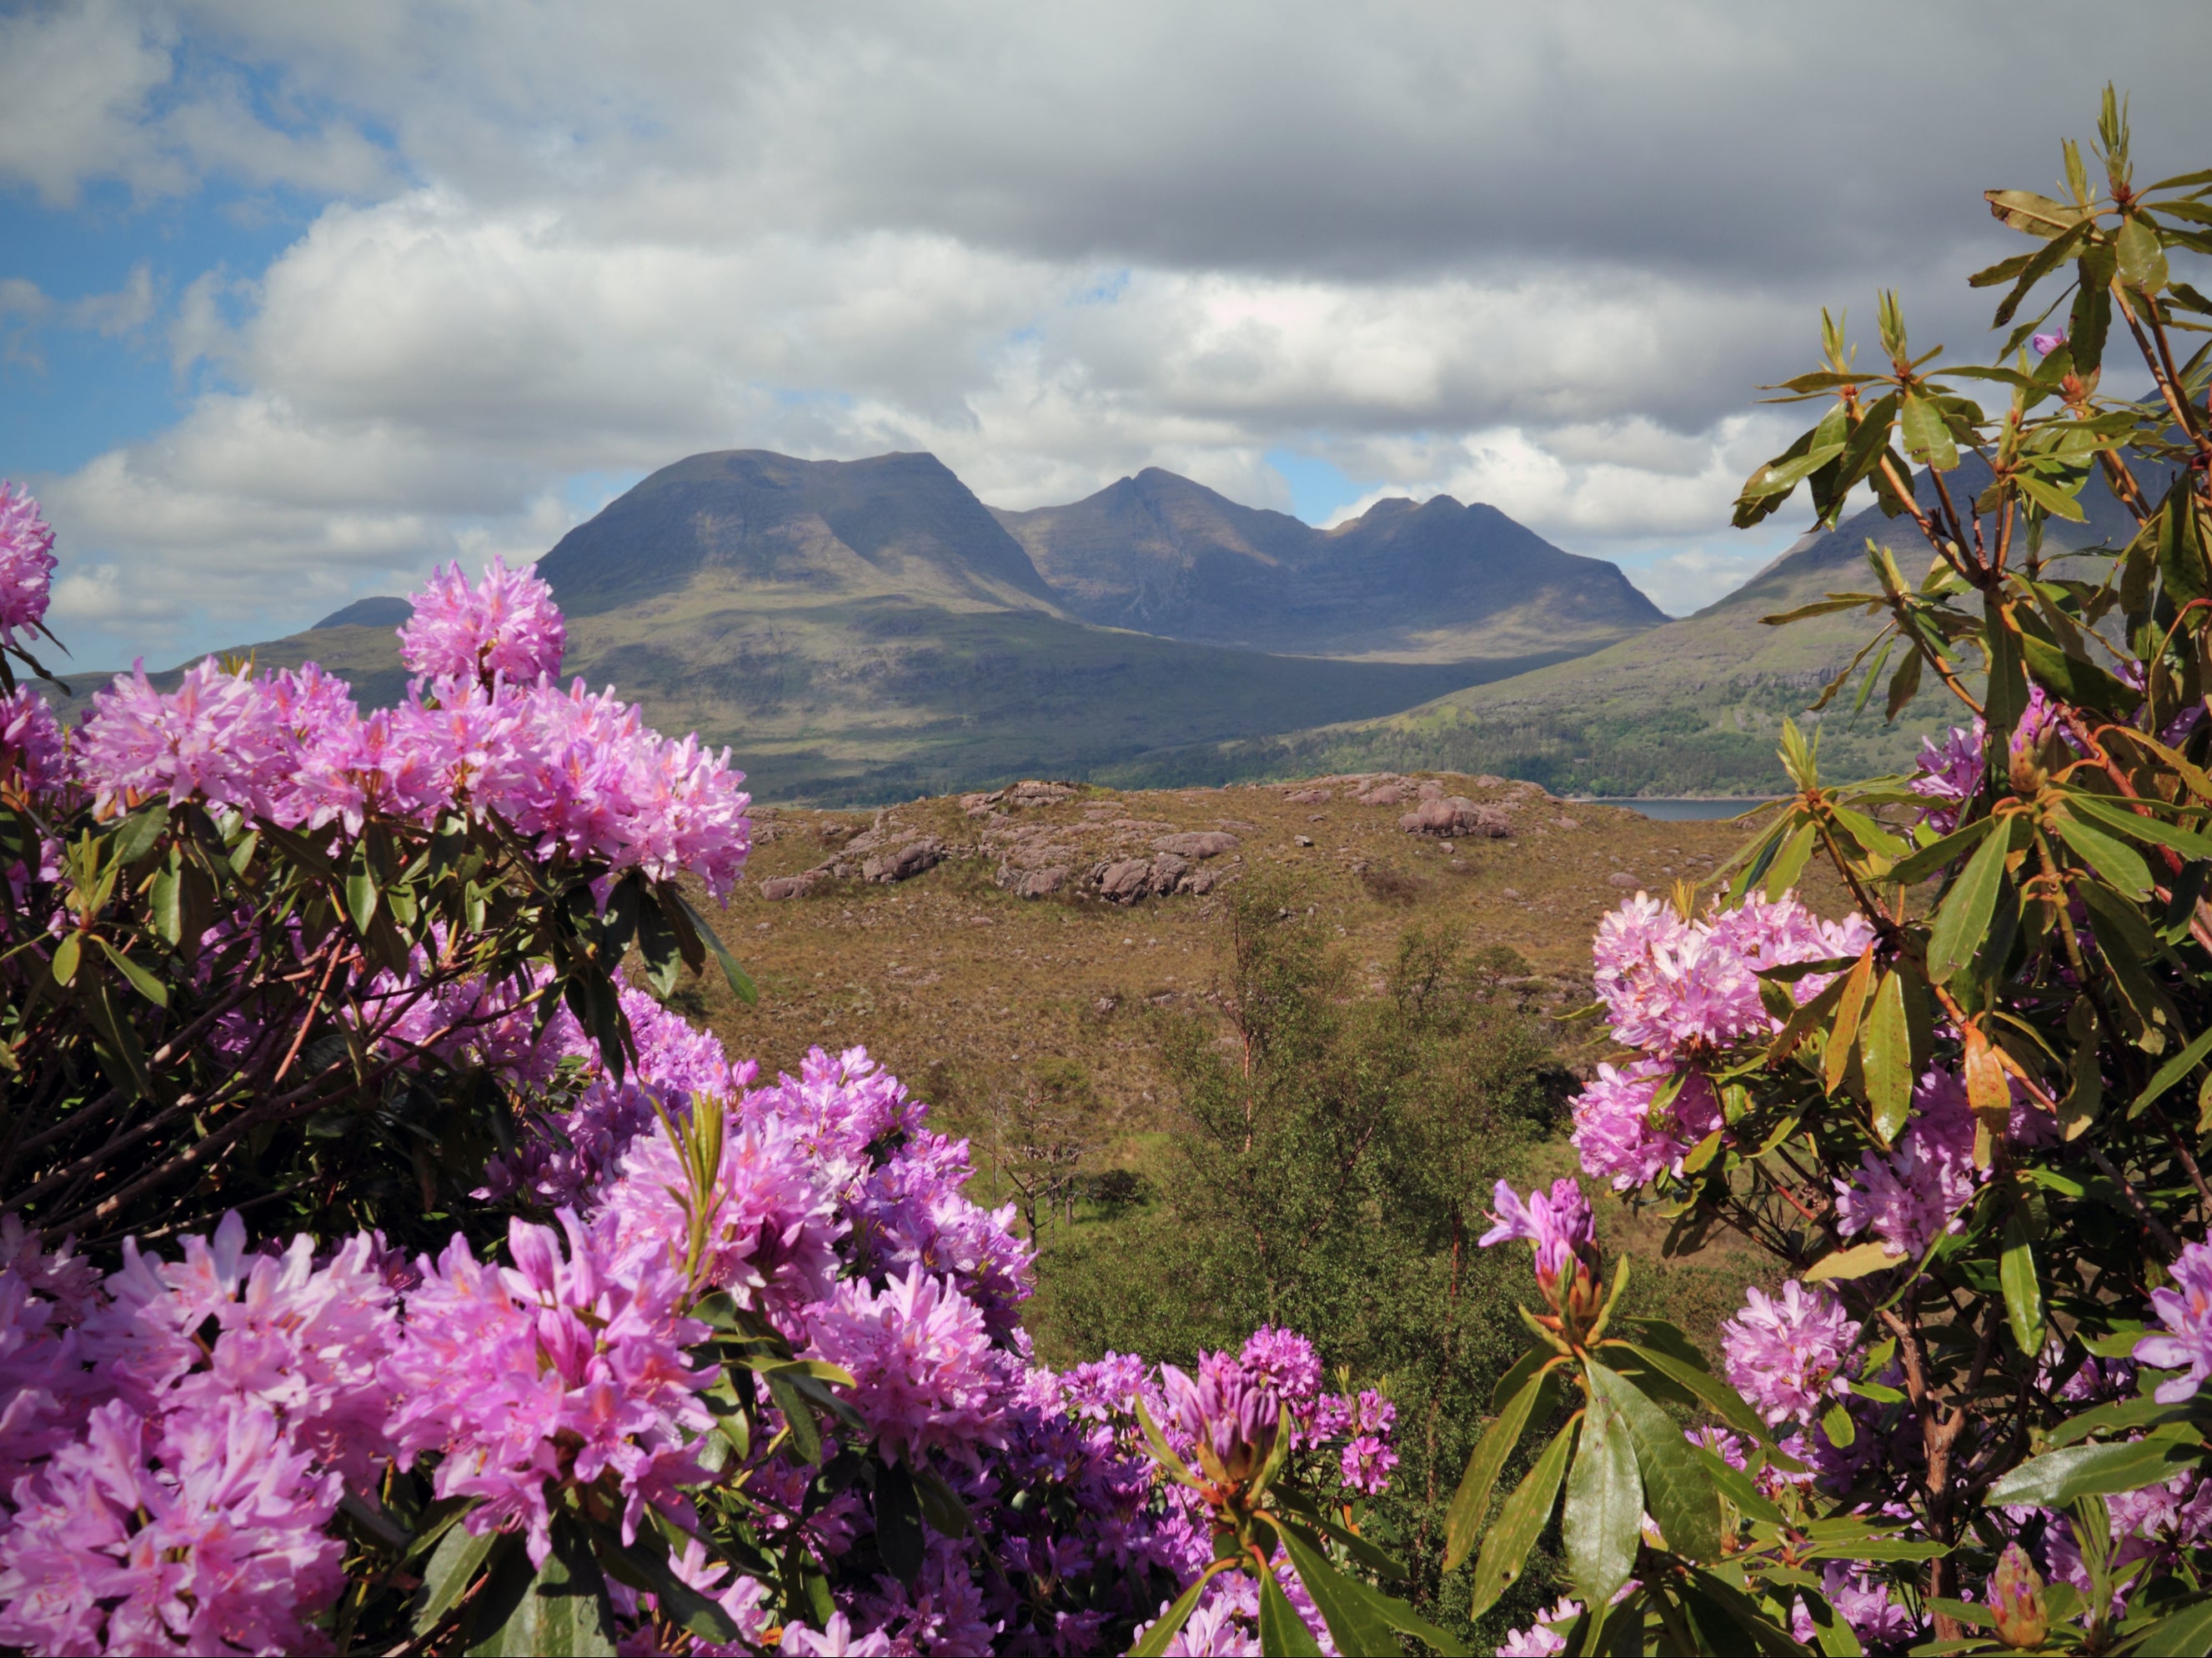 ‘They are a huge menace’: Rhododendrons, seen here in Scotland, prevent trees from growing and support few other species, reducing biodiversity and harming the environment